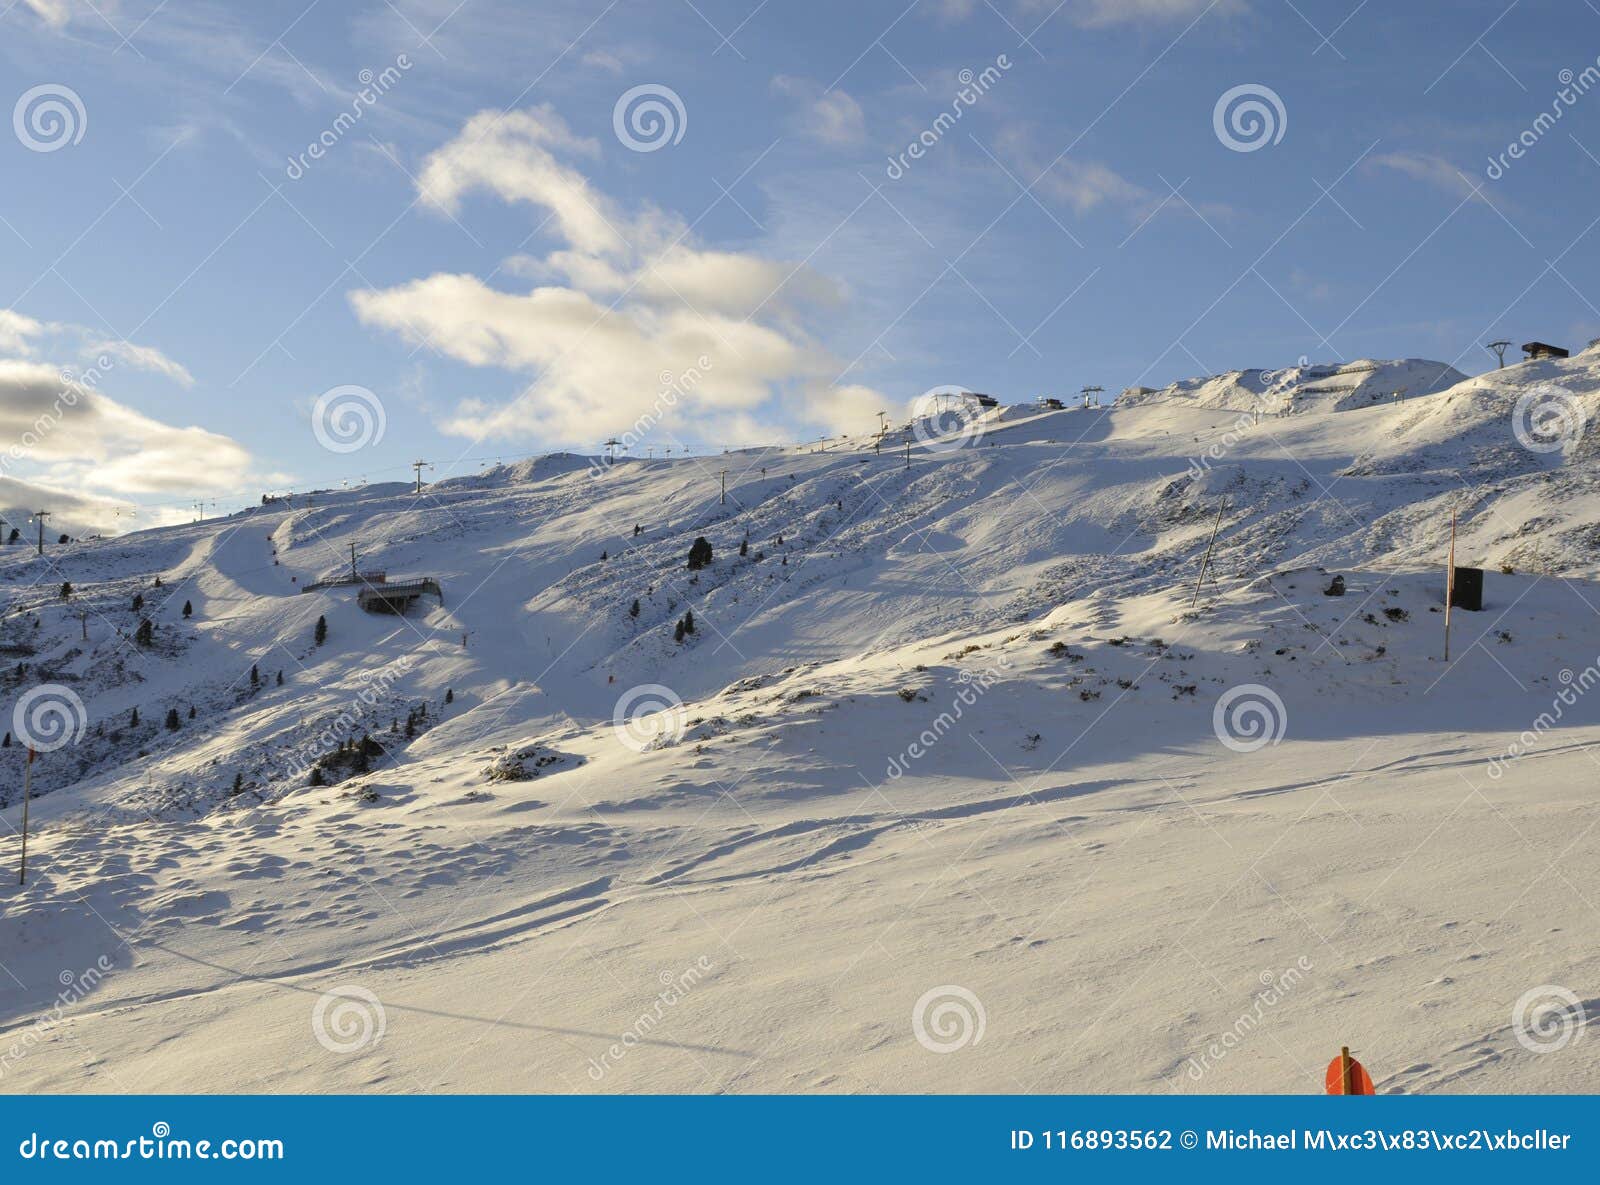 global clima change: empty skiaerea with artifical snow in hochzillertal valley, tyrol